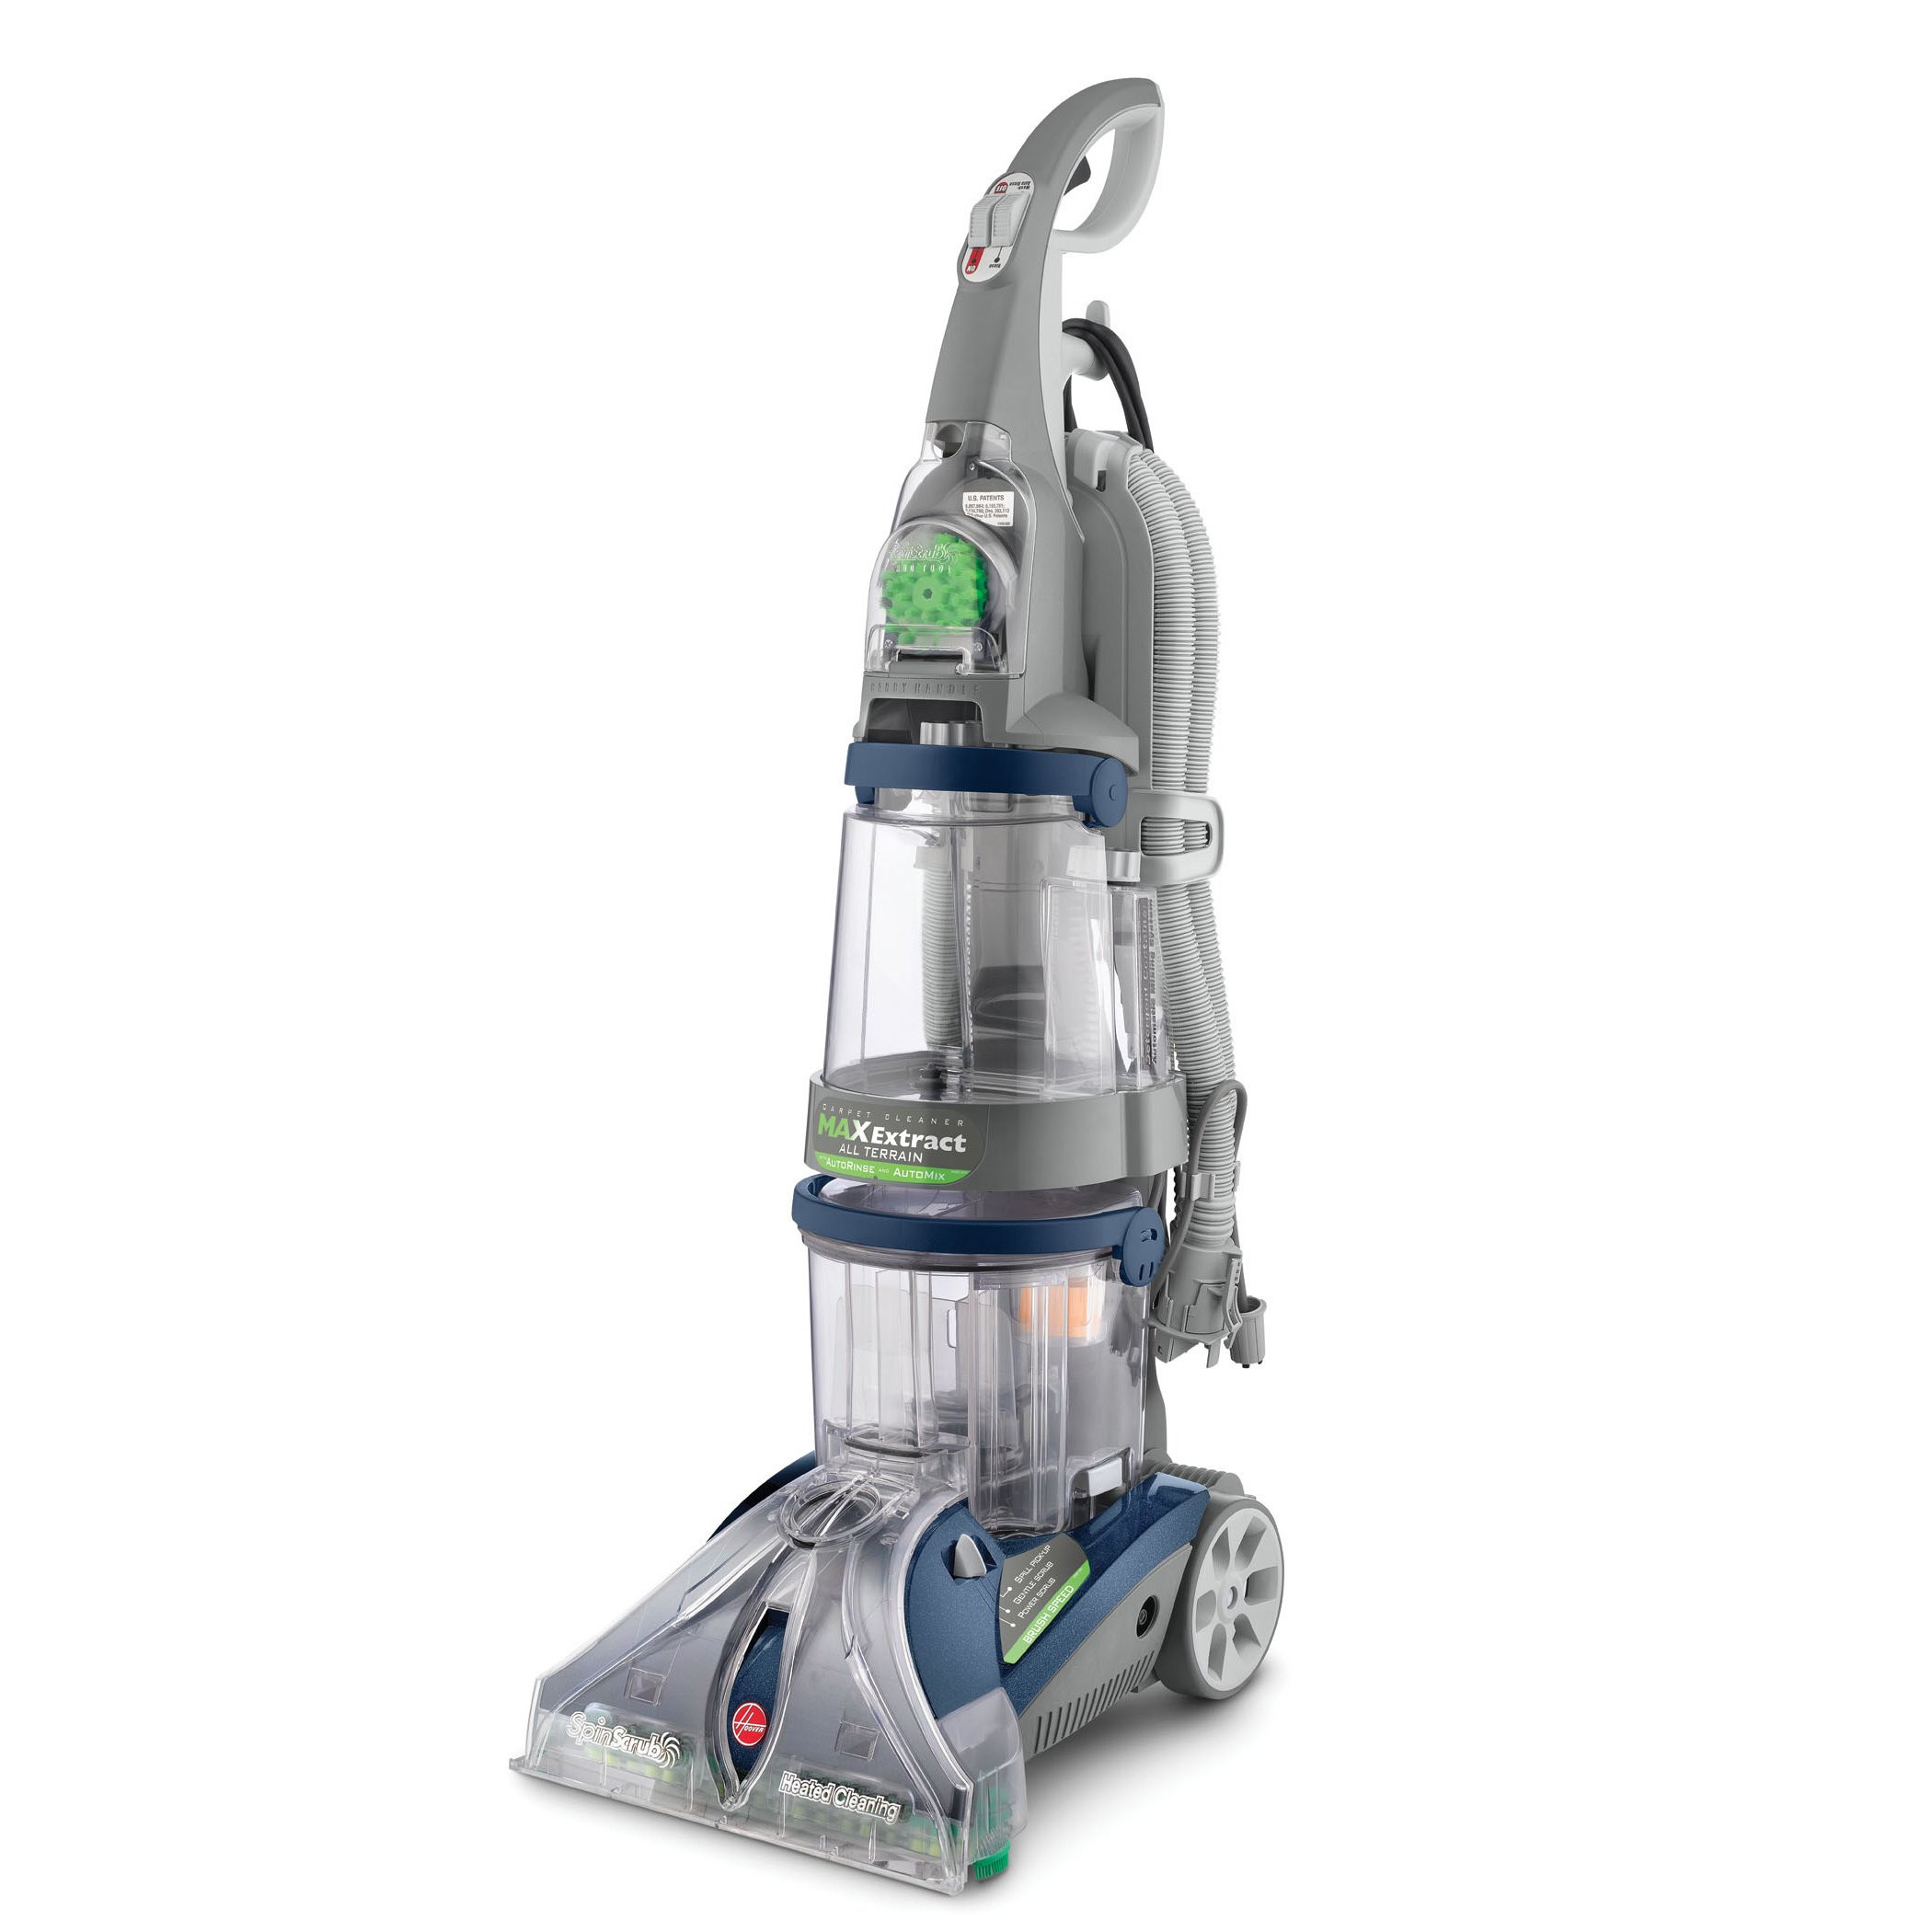 20 Perfect Vacuum with Hardwood Floor attachment 2024 free download vacuum with hardwood floor attachment of shop hoover f7452 900 steamvac all terrain 6 brush dual v deep inside shop hoover f7452 900 steamvac all terrain 6 brush dual v deep cleaner free shi